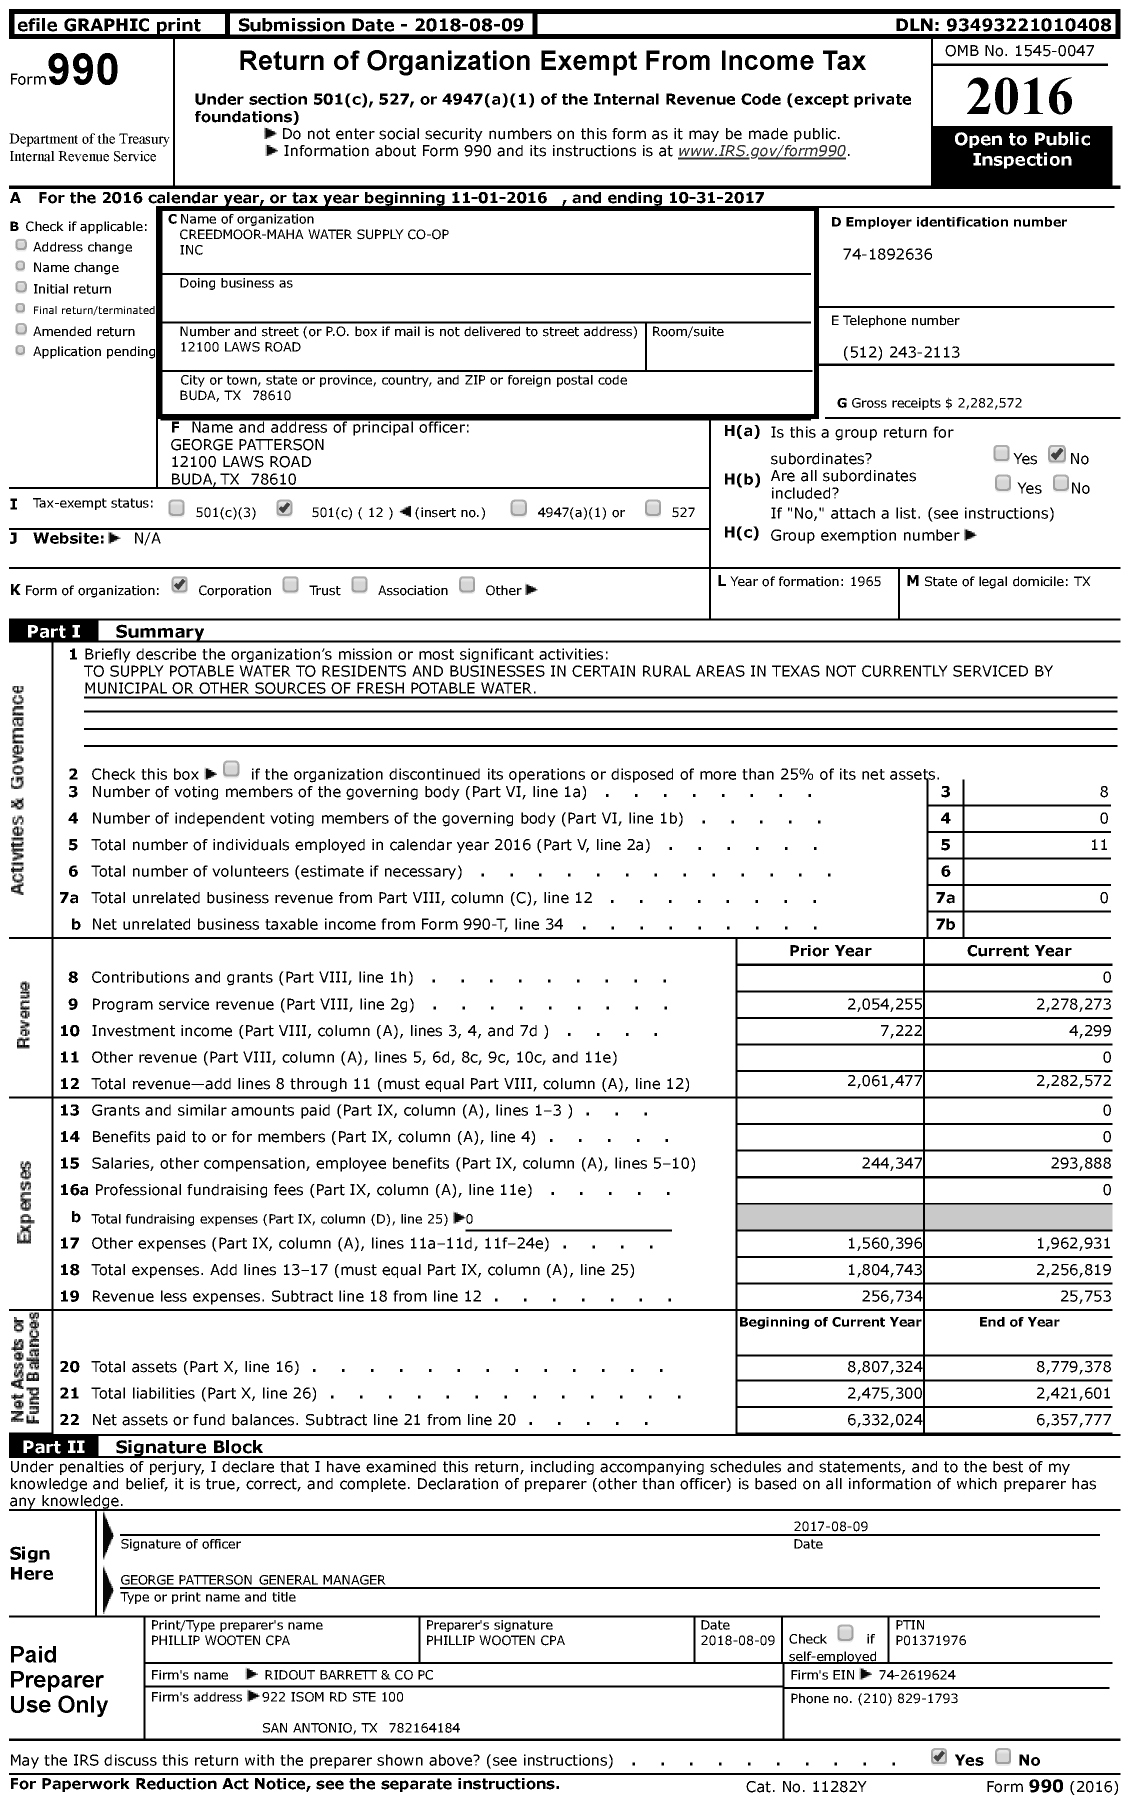 Image of first page of 2016 Form 990 for Creedmoor-Maha Water Supply Corporation